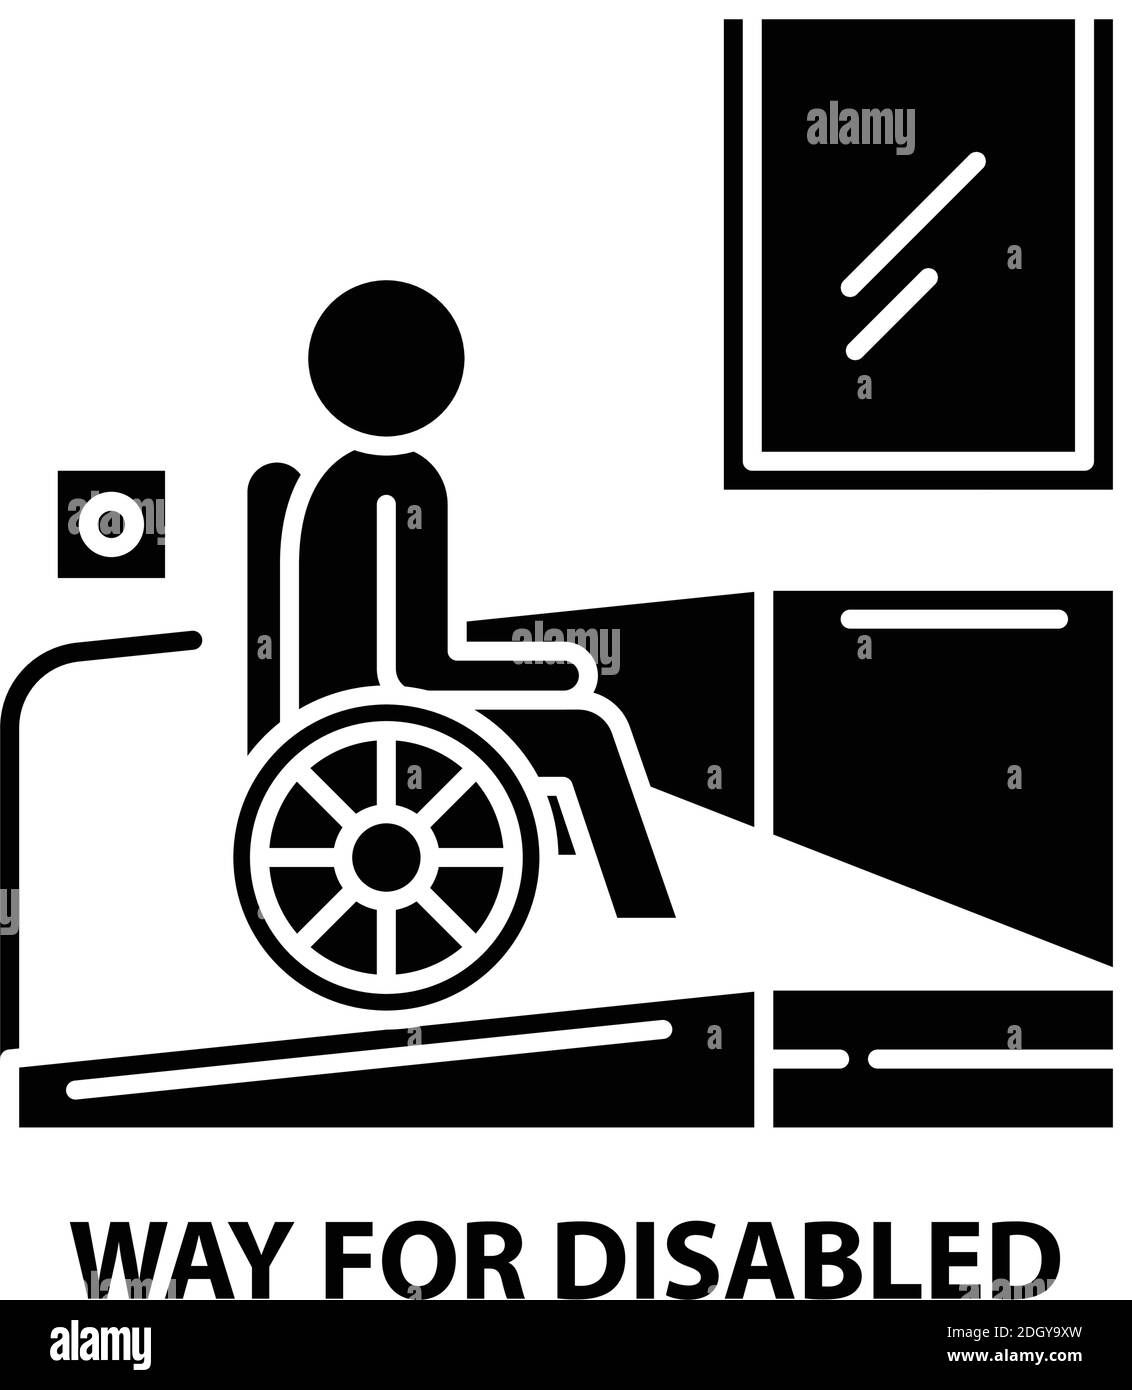 way for disabled icon, black vector sign with editable strokes, concept illustration Stock Vector